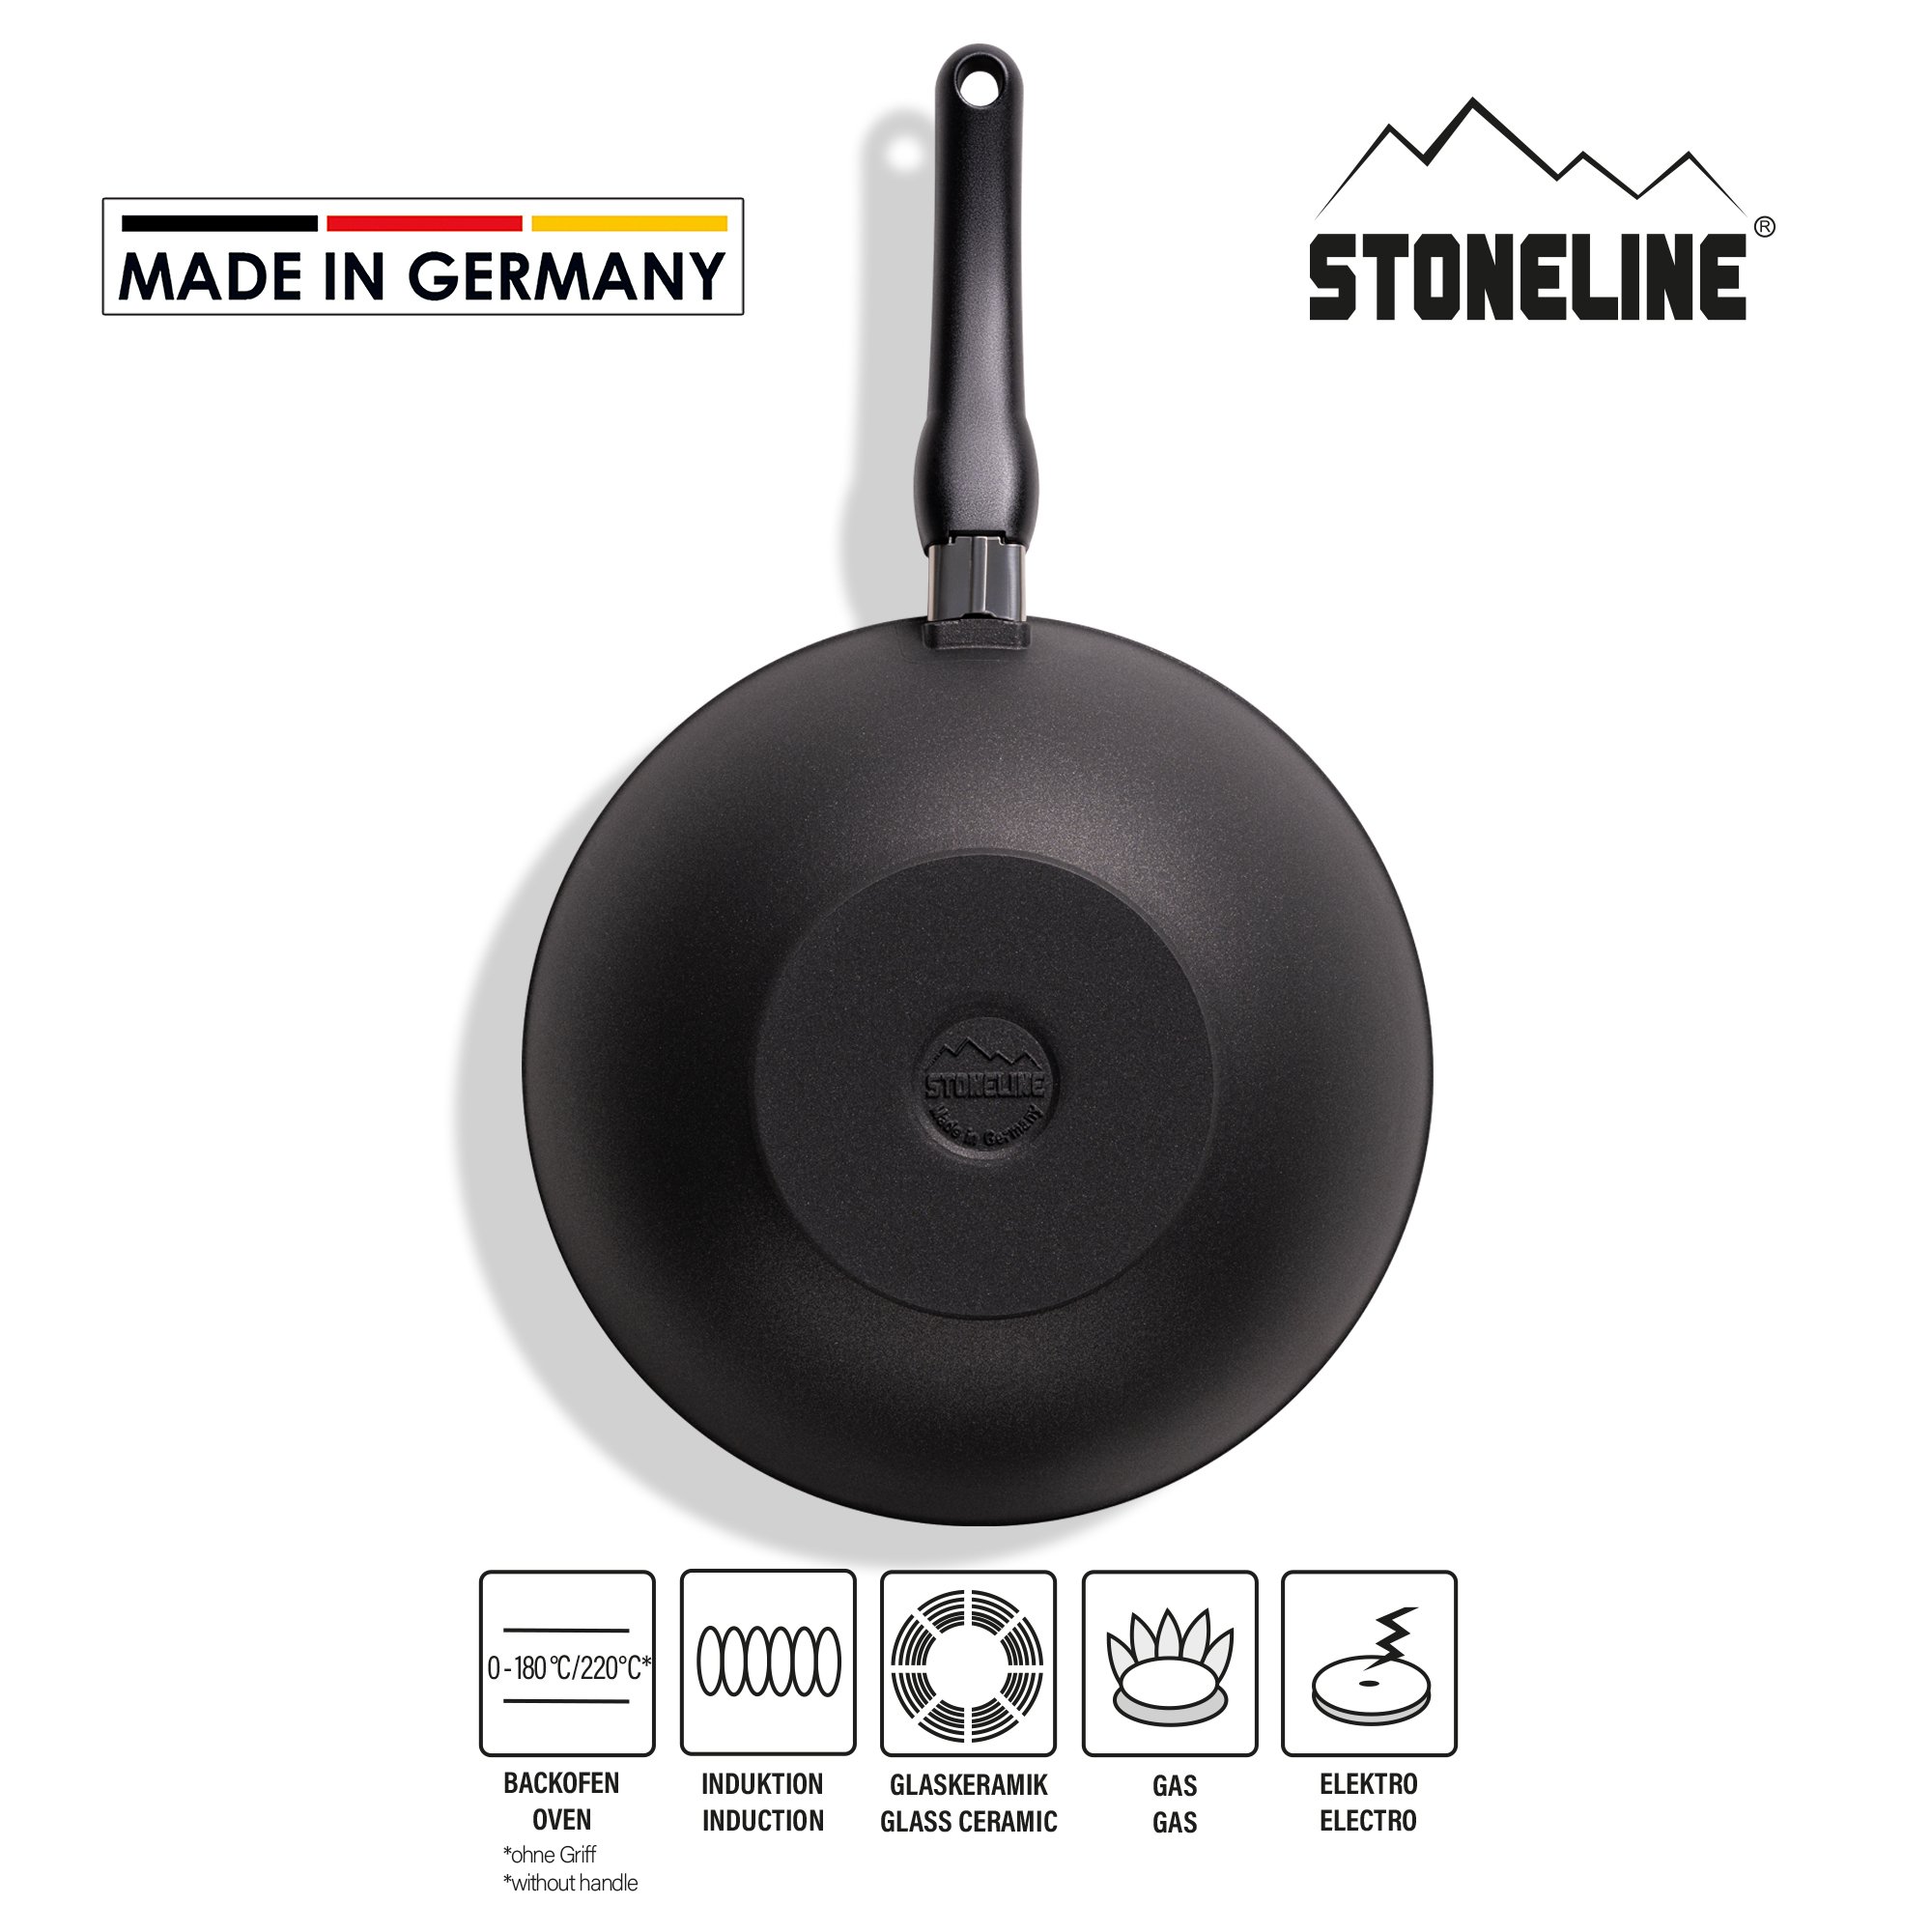 STONELINE® Wok Pan 30 cm, Removable Handle, Cast Non-Stick Pan | Made in Germany